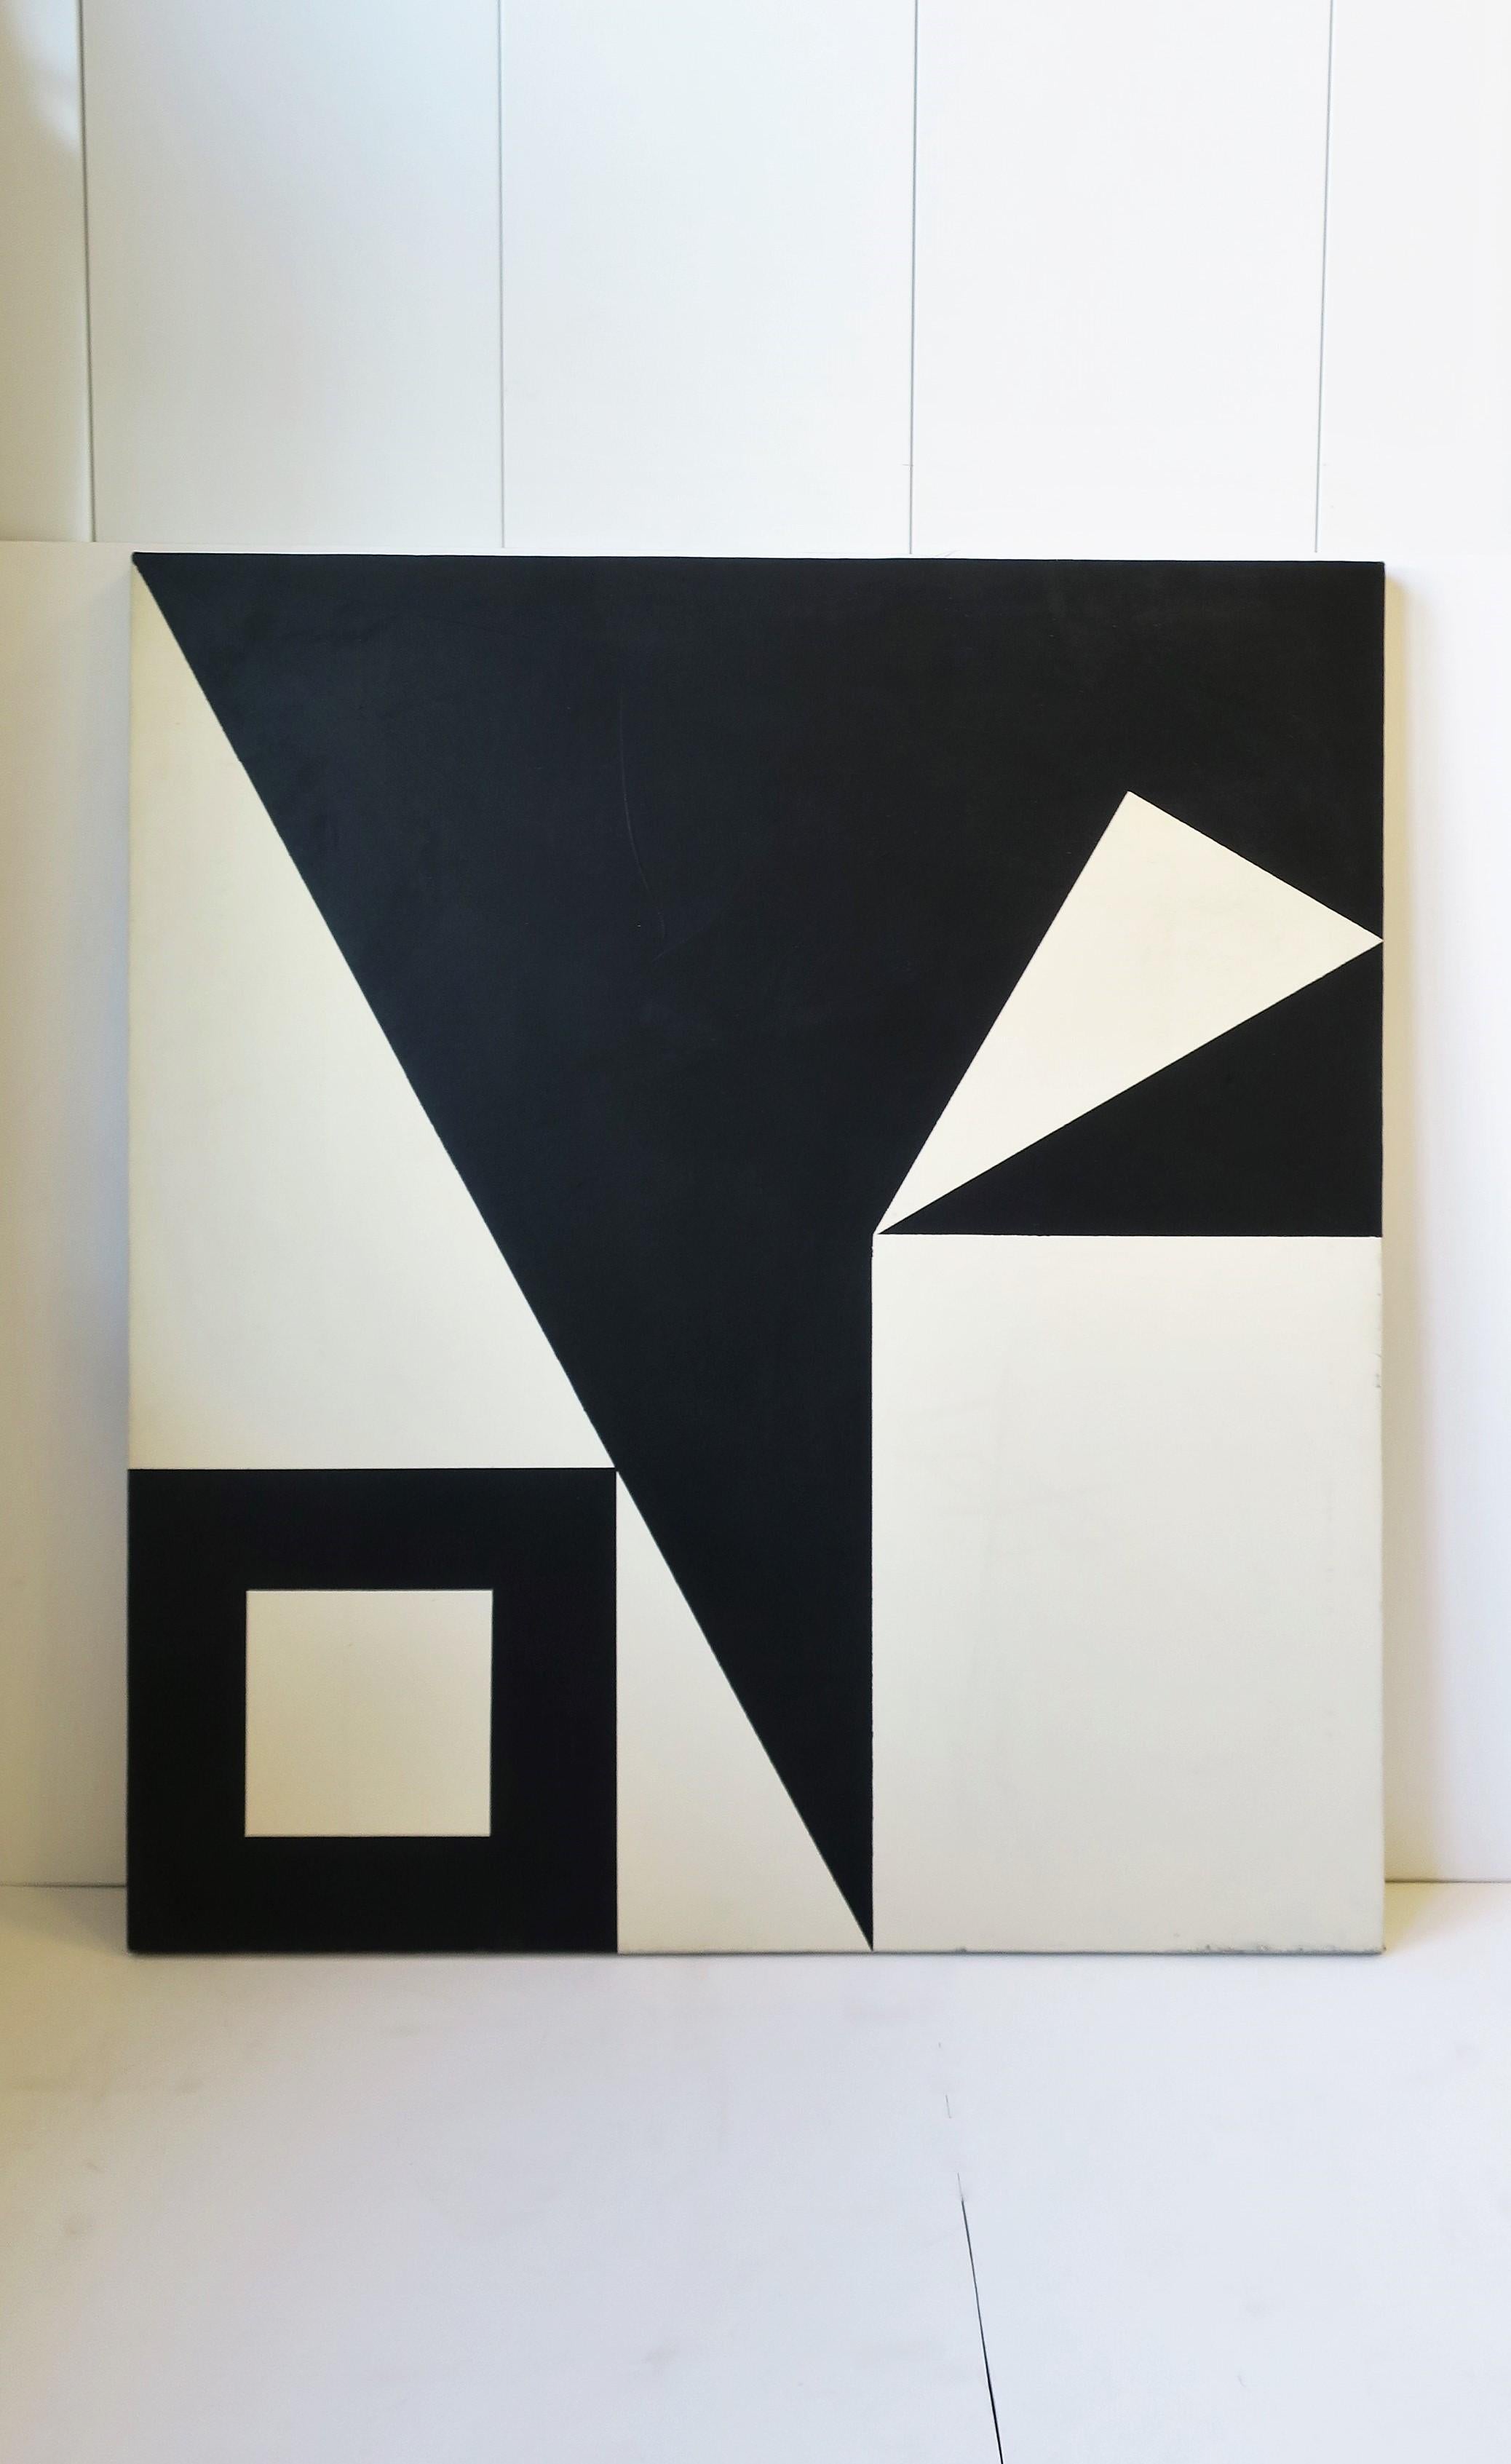 A beautiful, relatively large, black and white (off-white) abstract geometric artwork, oil or acrylic paint, on a hand-stretched canvas, circa mid to late-20th century. Artwork is unsigned, but in the style of Ellsworth Kelly. Piece is prepared for